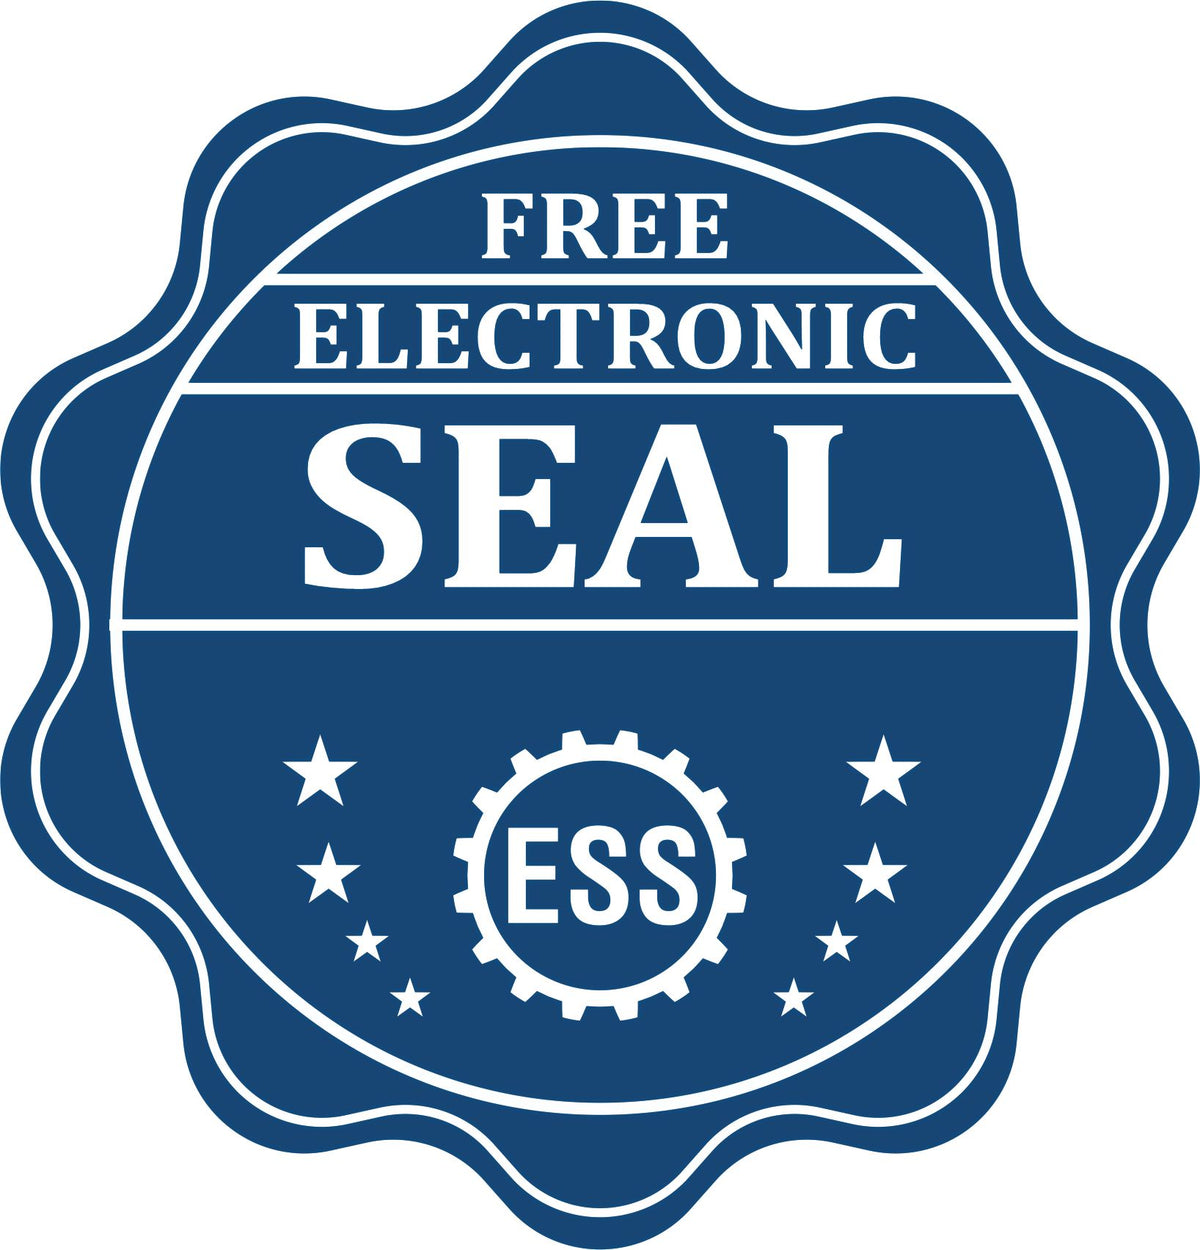 A badge showing a free electronic seal for the Premium MaxLight Pre-Inked West Virginia Landscape Architectural Stamp with stars and the ESS gear on the emblem.